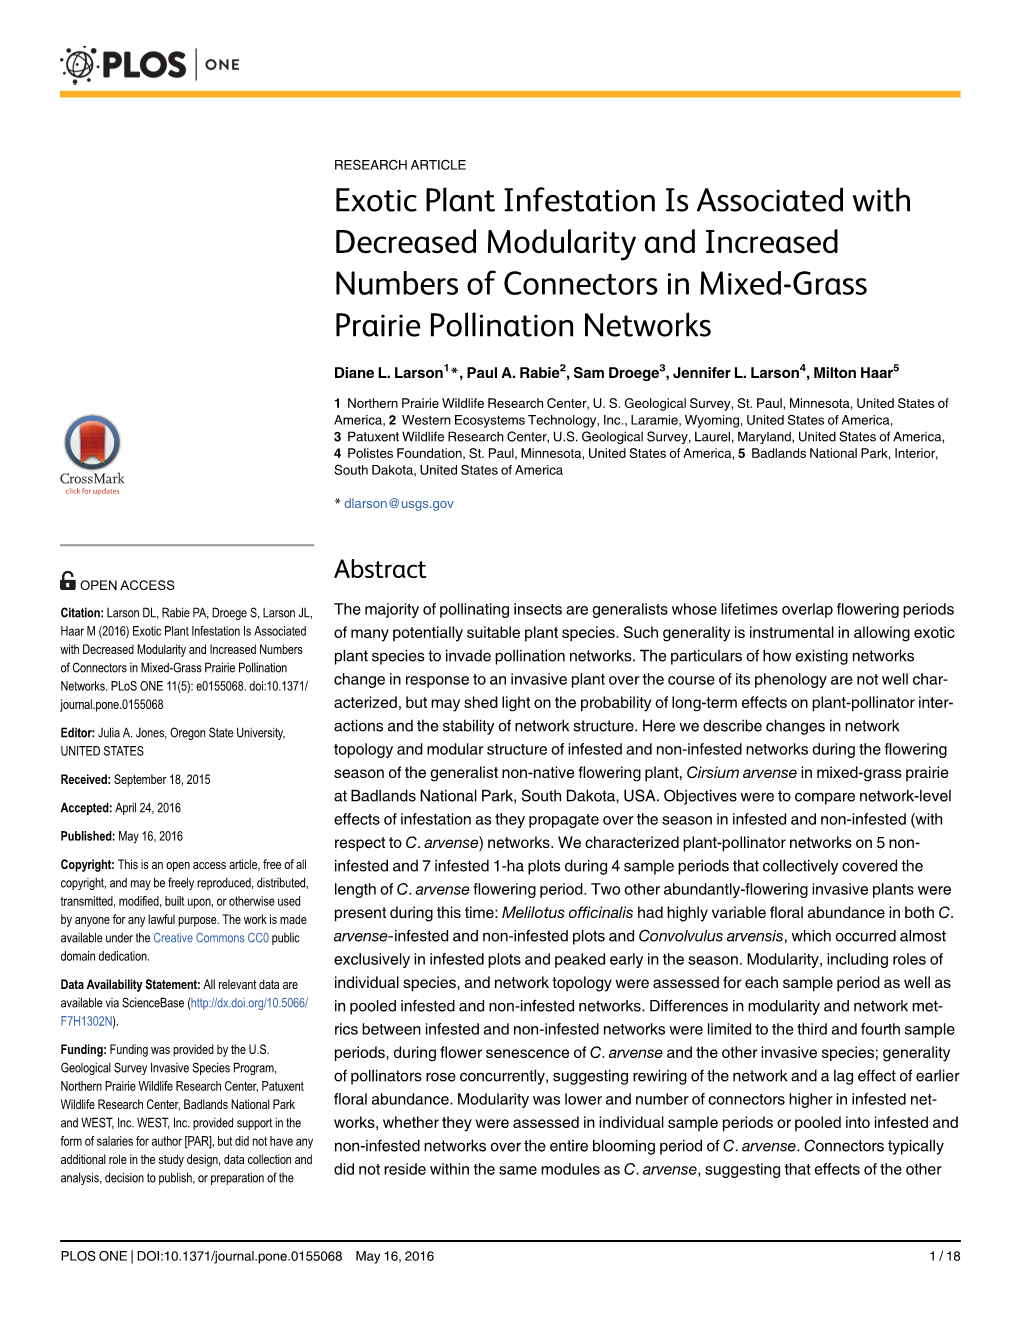 Exotic Plant Infestation Is Associated with Decreased Modularity and Increased Numbers of Connectors in Mixed-Grass Prairie Pollination Networks